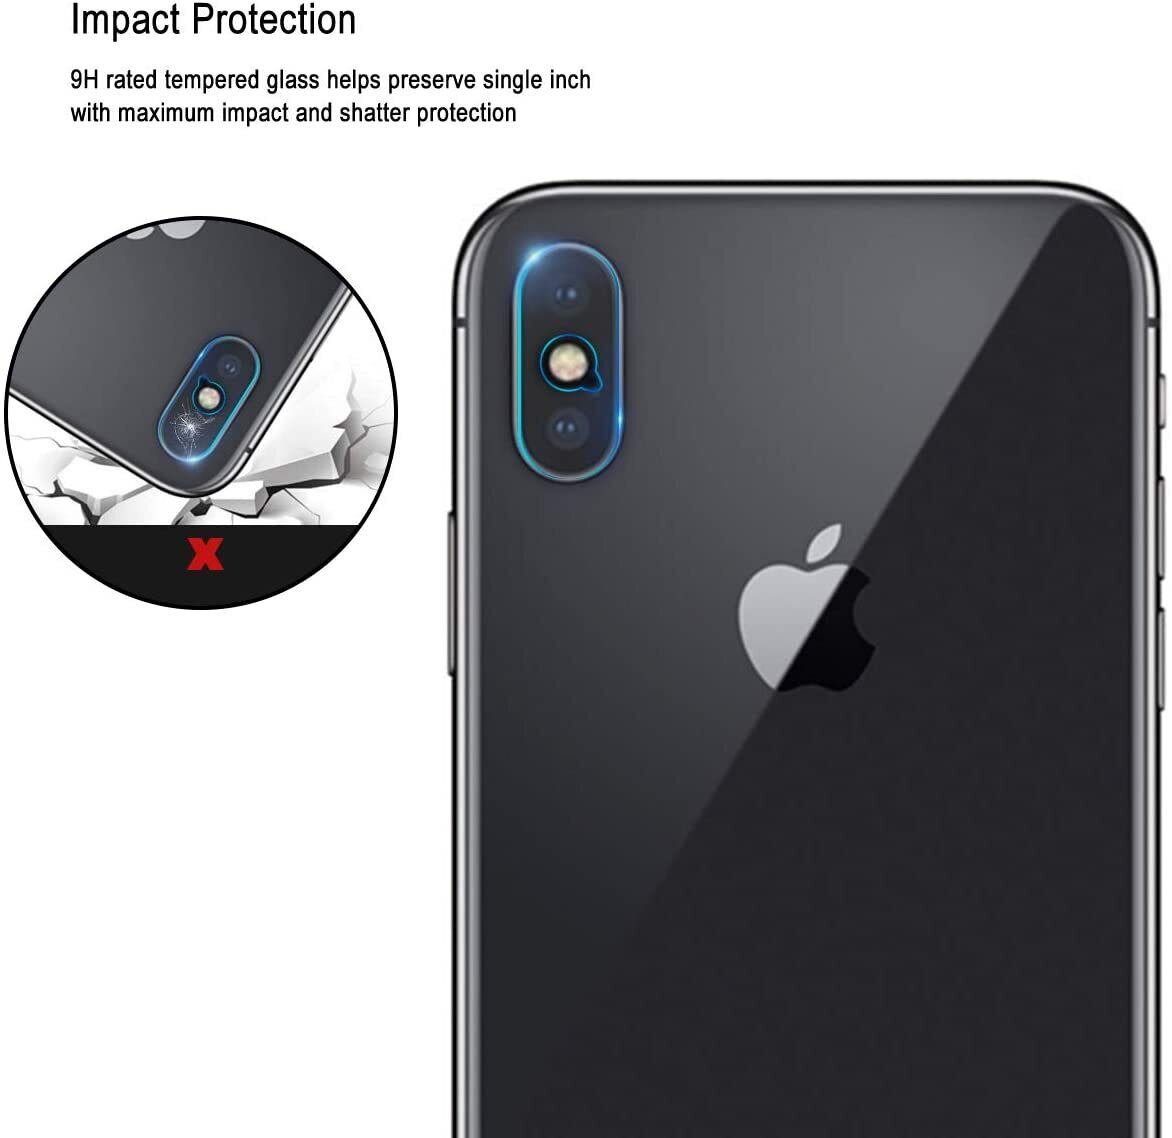 2x Screen Protector Nuglas Clear Tempered Glass iPhoneX/Xs/Xs Max Camera Lens 